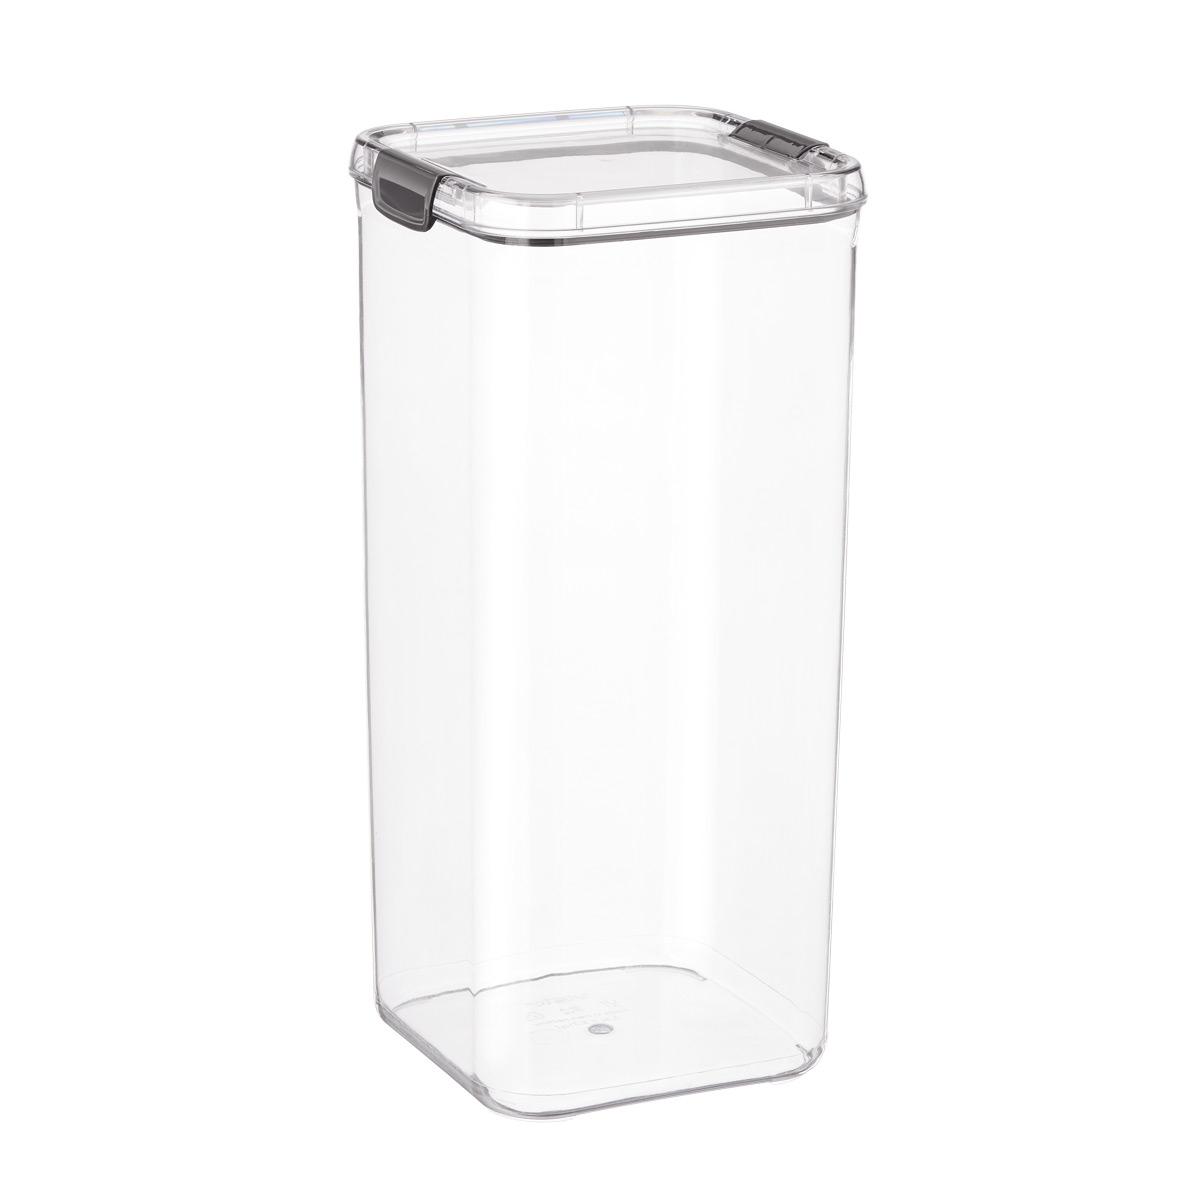 https://www.containerstore.com/catalogimages/438064/10083914_5.9_Quart_Food_Container.jpg